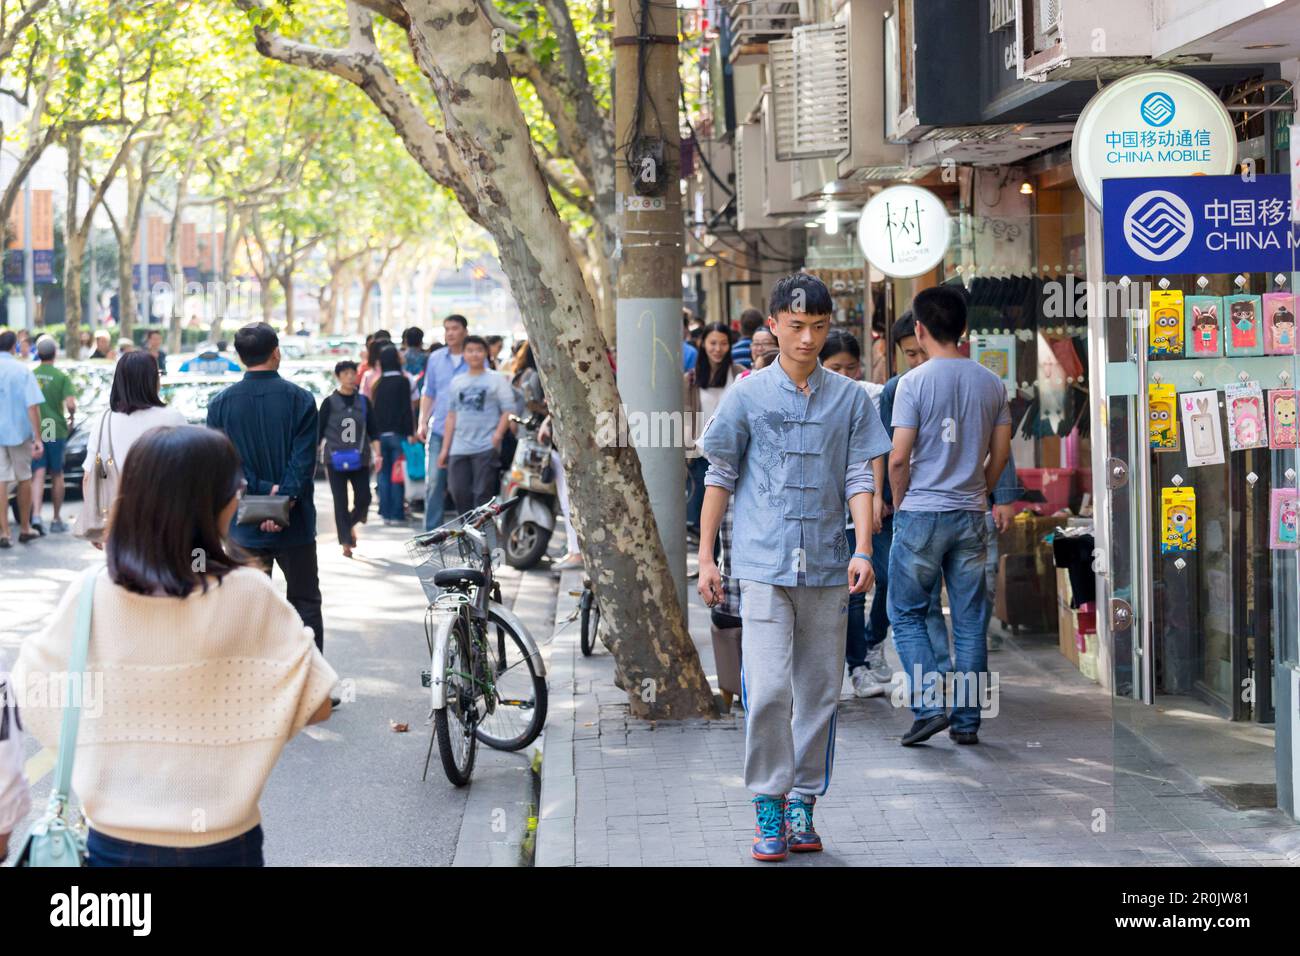 Tianzifang, young man, China mobile store, plane trees, shopping street, French Concession area, Shanghai, China, Asia Stock Photo